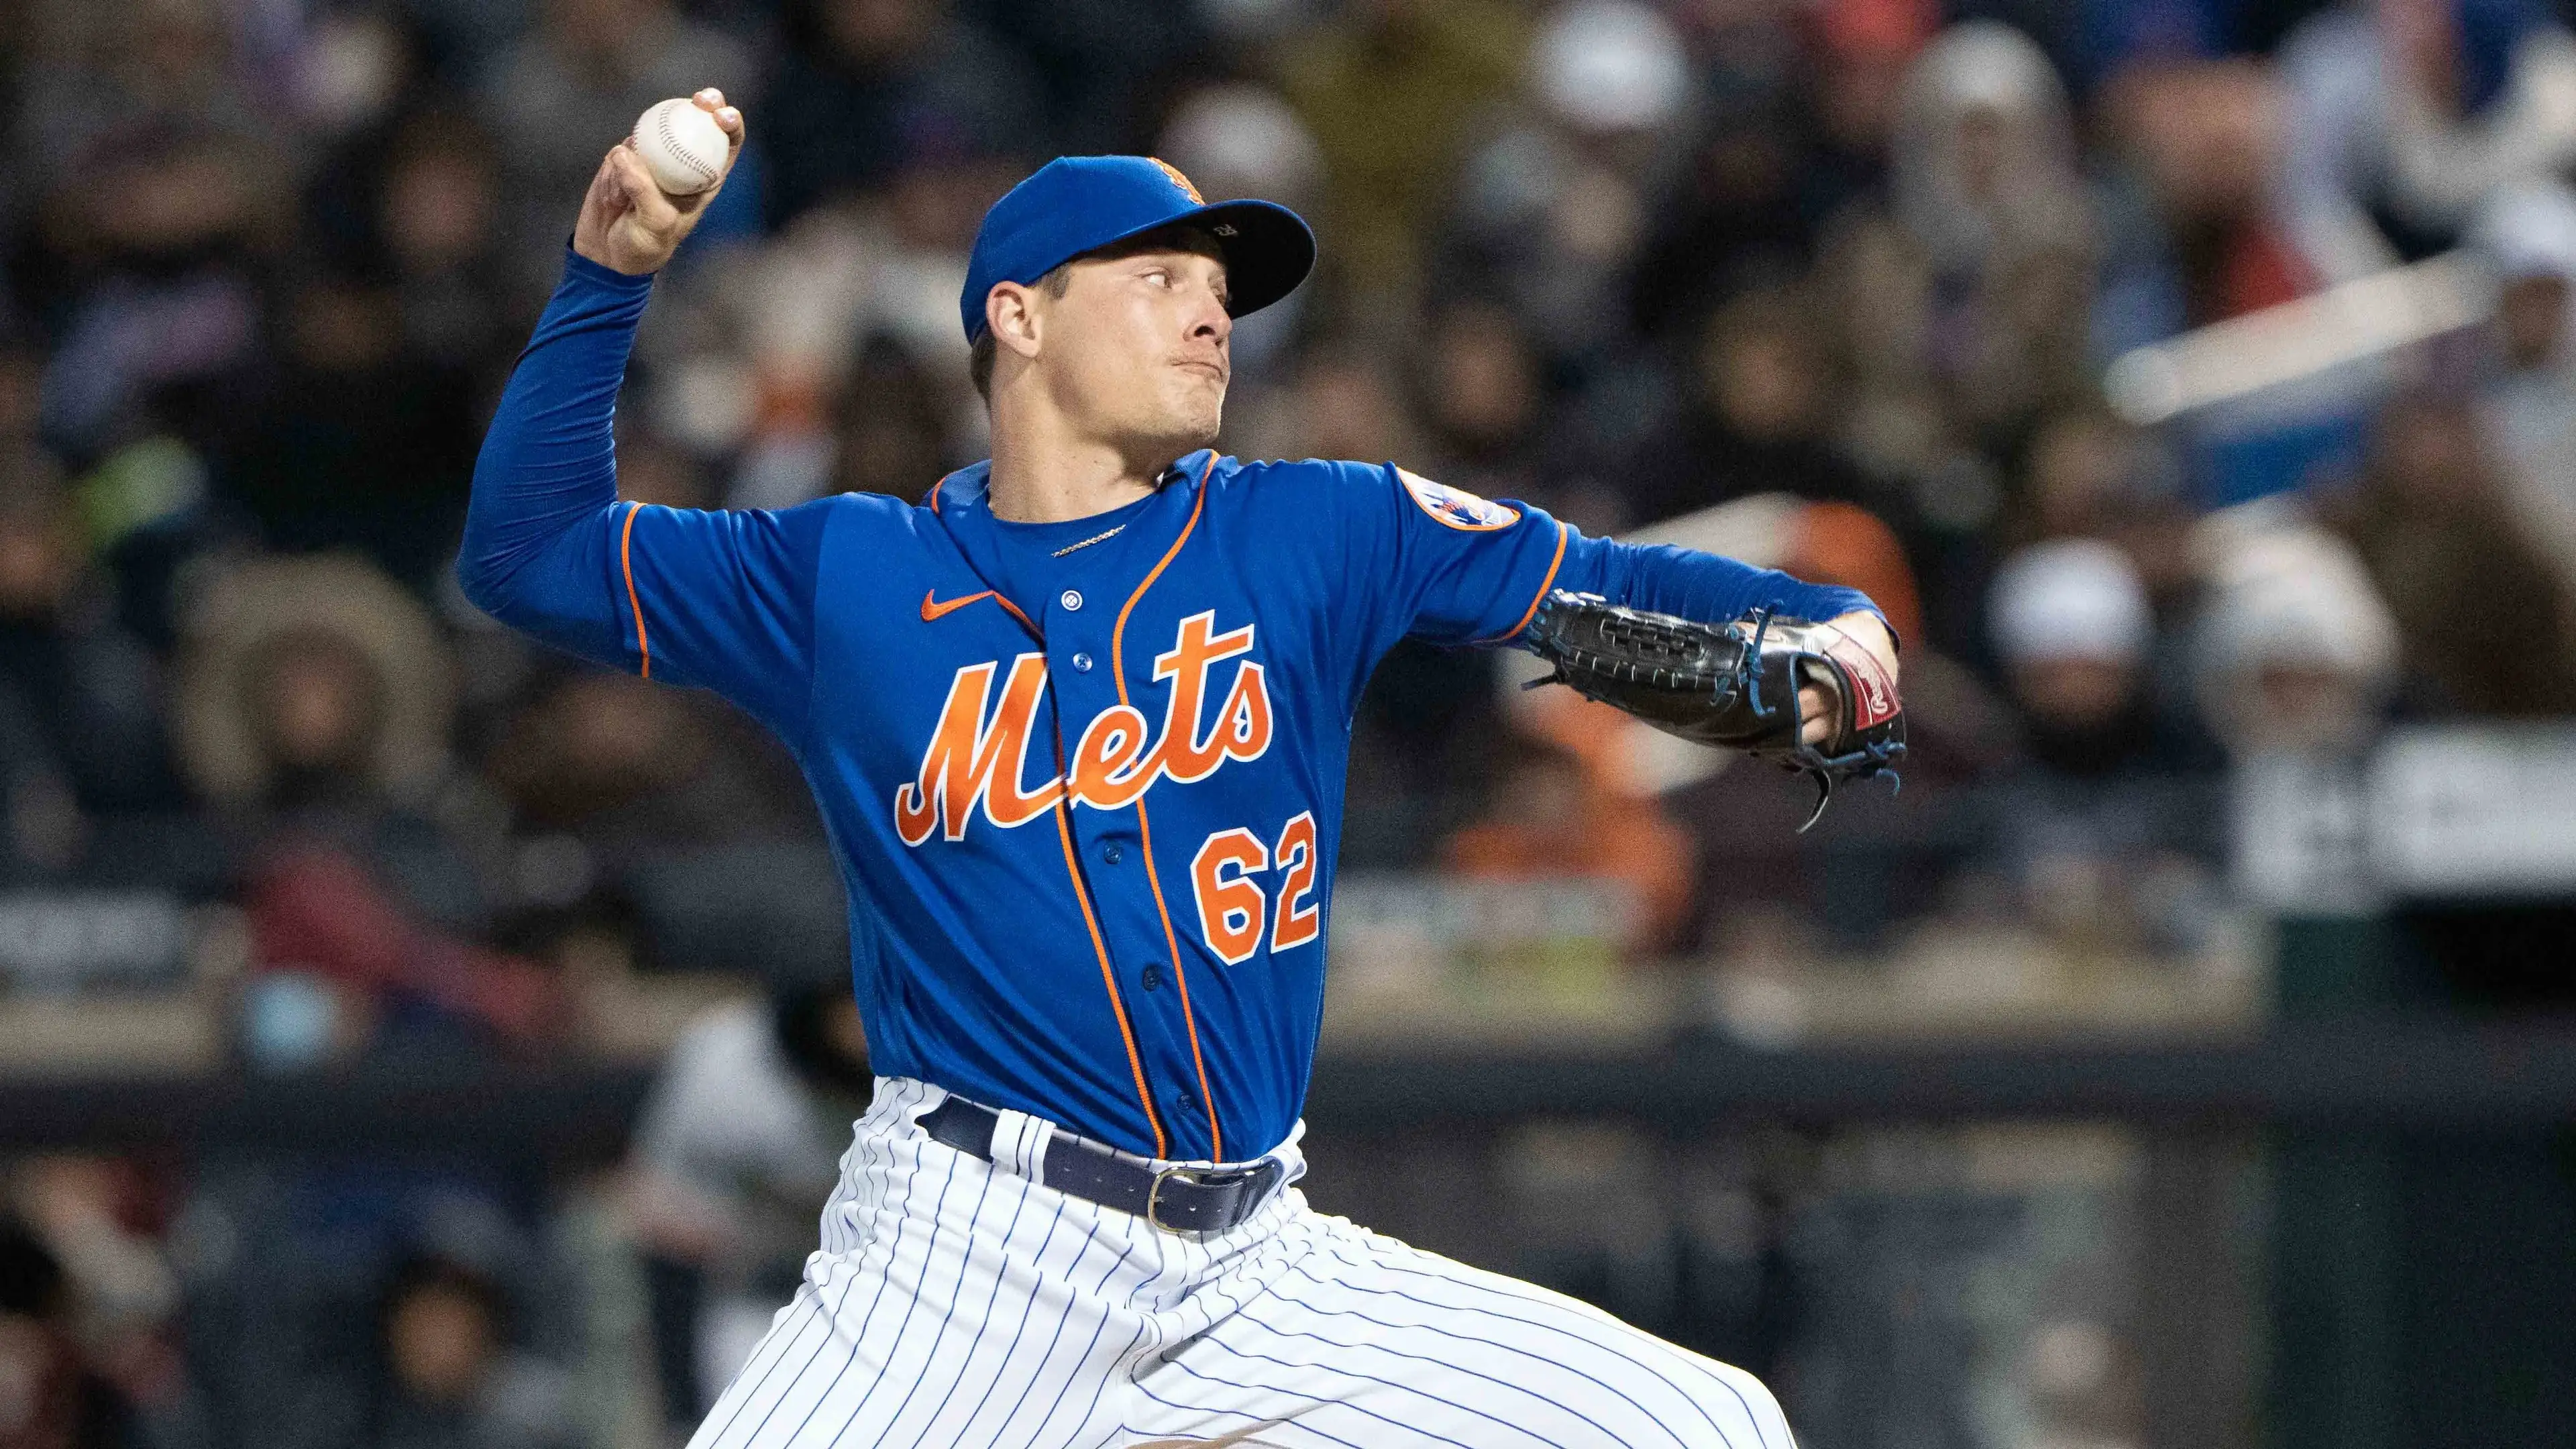 Apr 19, 2022; New York City, New York, USA; New York Mets pitcher Drew Smith (62) delivers a pitch against the San Francisco Giants during the eighth inning at Citi Field. Mandatory Credit: Gregory Fisher-USA TODAY Sports / Gregory Fisher-USA TODAY Sports